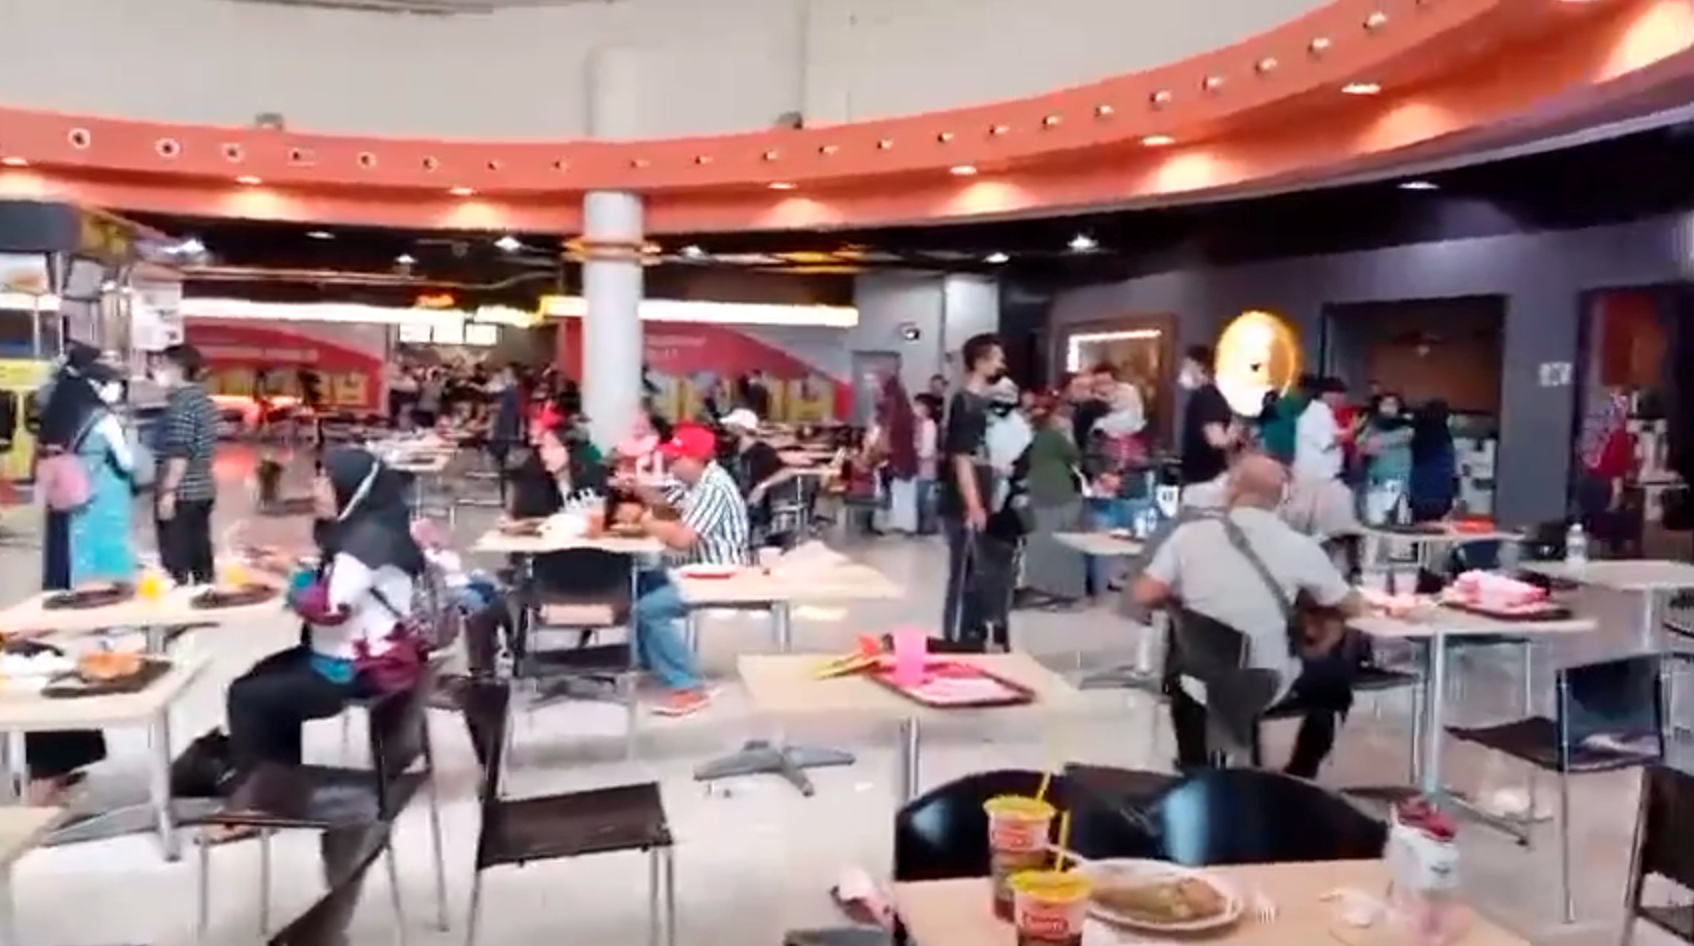 People stand during a tremor, at a food court in Royal Plaza in Surabaya